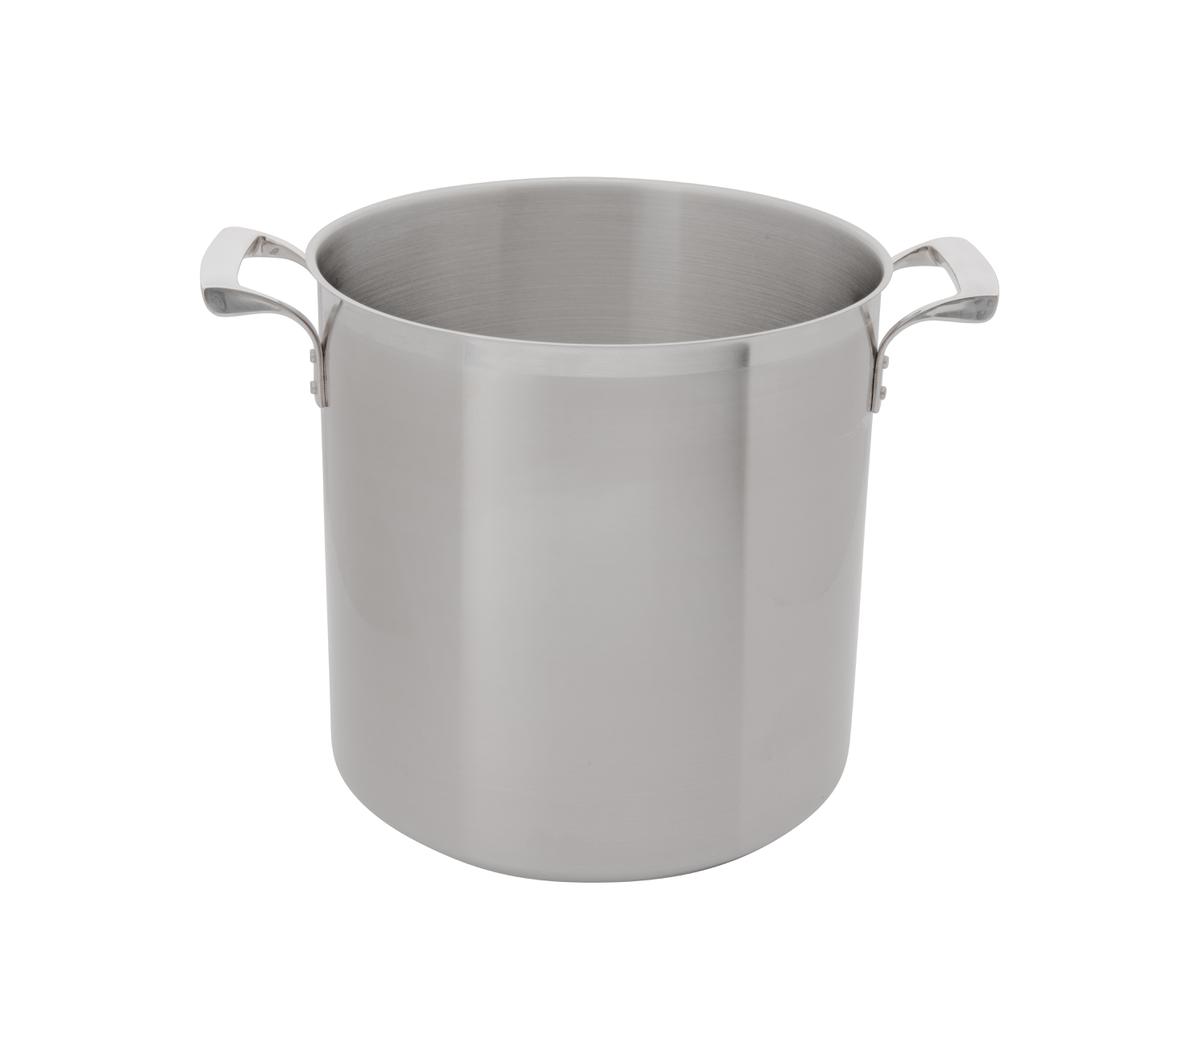 Thermalloy Stainless Steel Deep Stock Pot 32 QT - 5723932 (Lid 5724134)